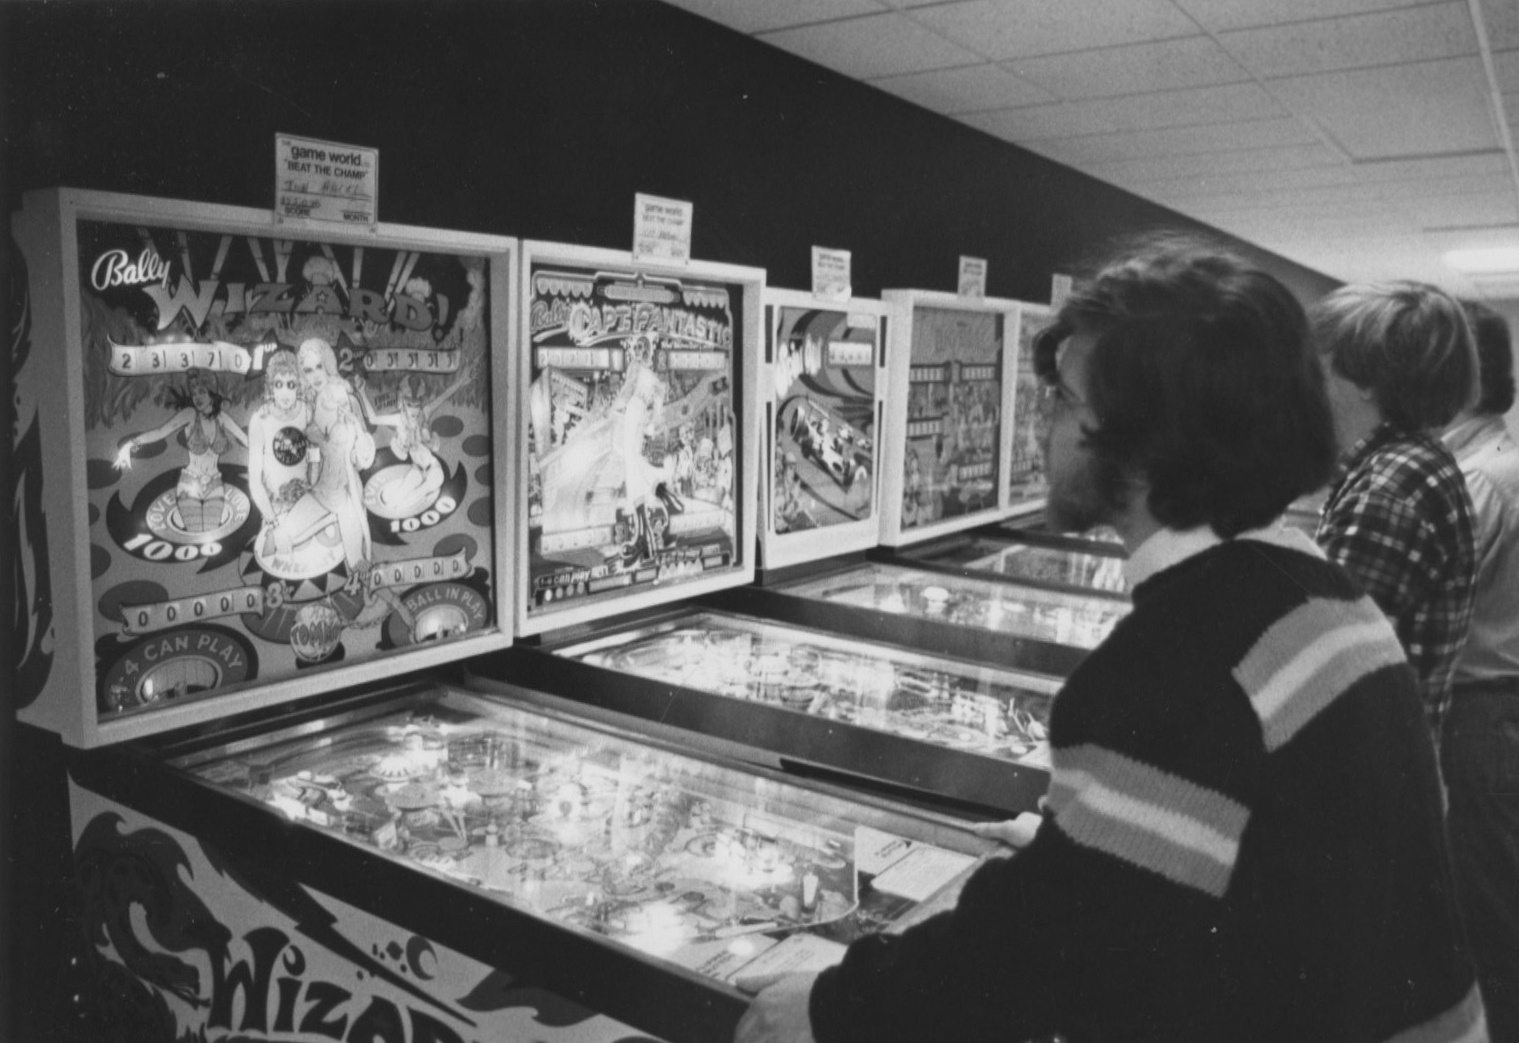 Black and white photo of. students playing arcade games